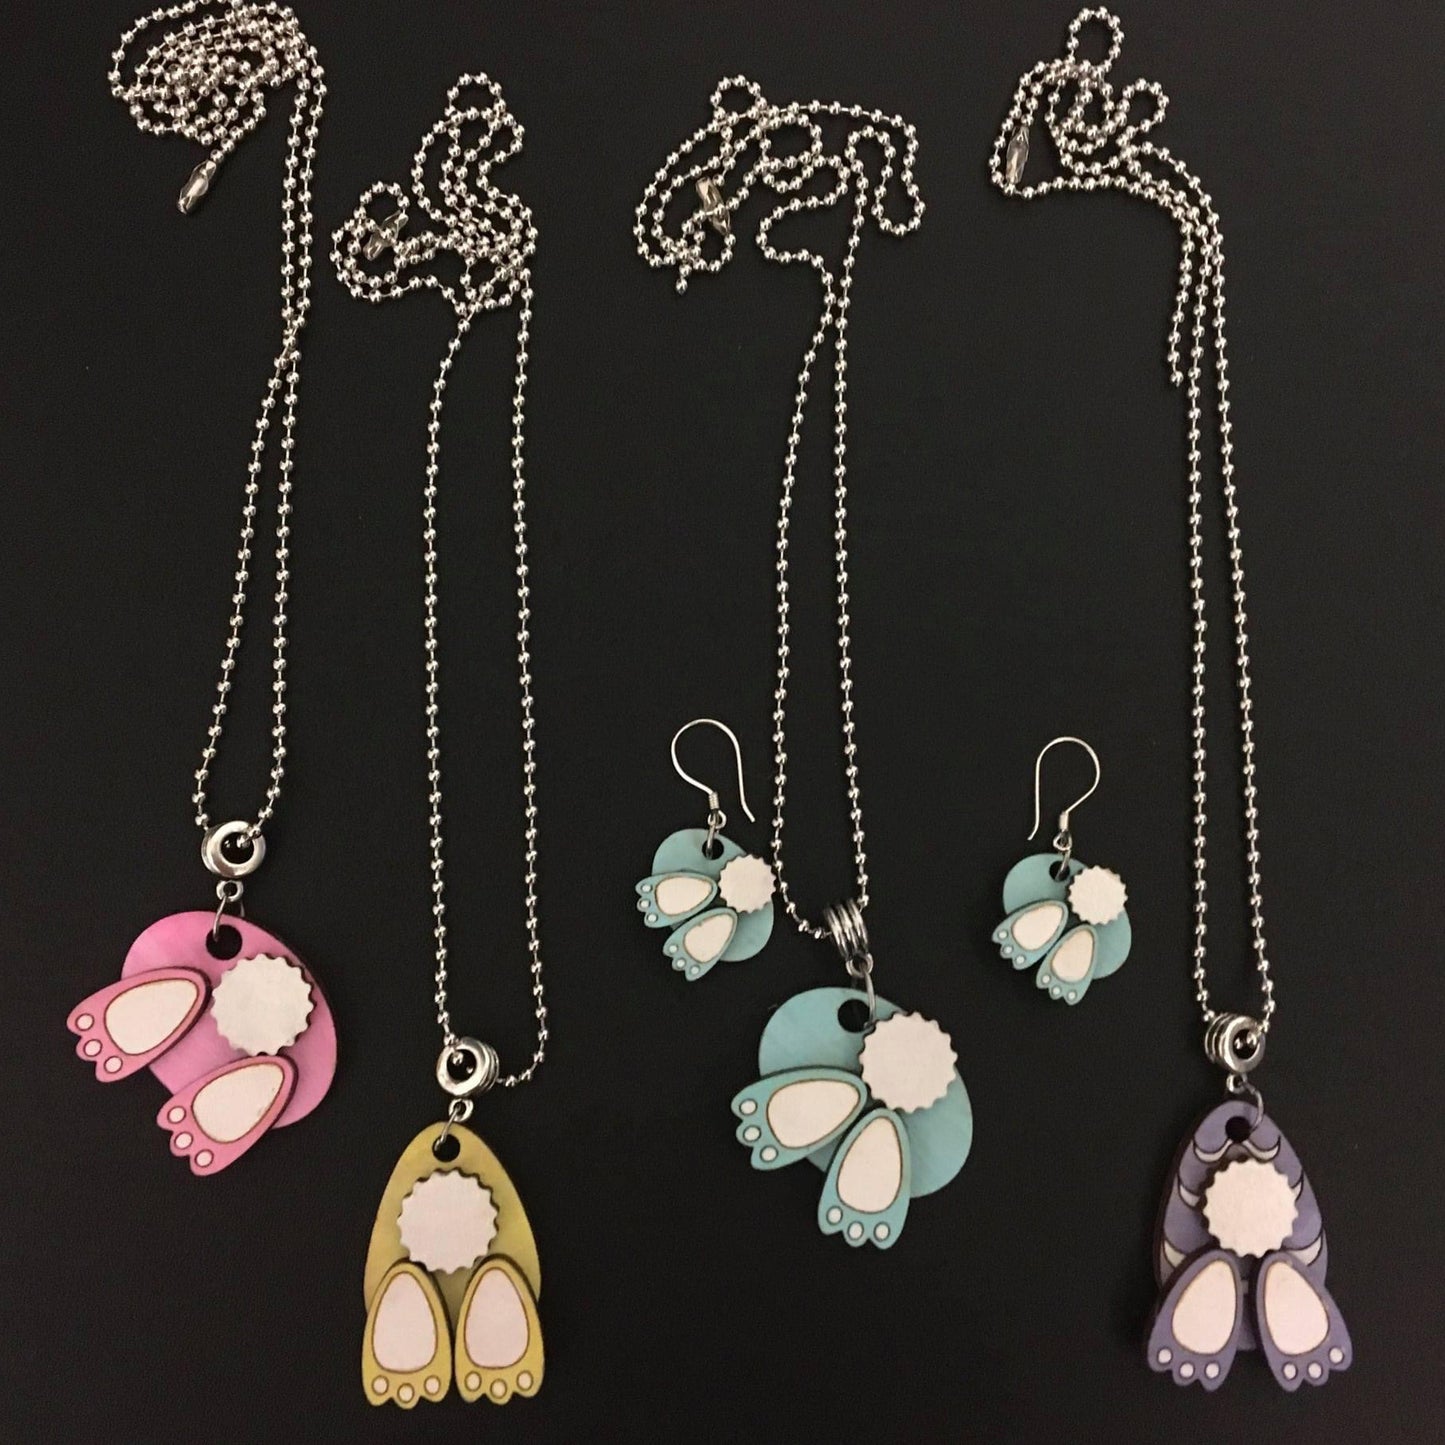 Bunny Bottoms Earrings and Charm Set